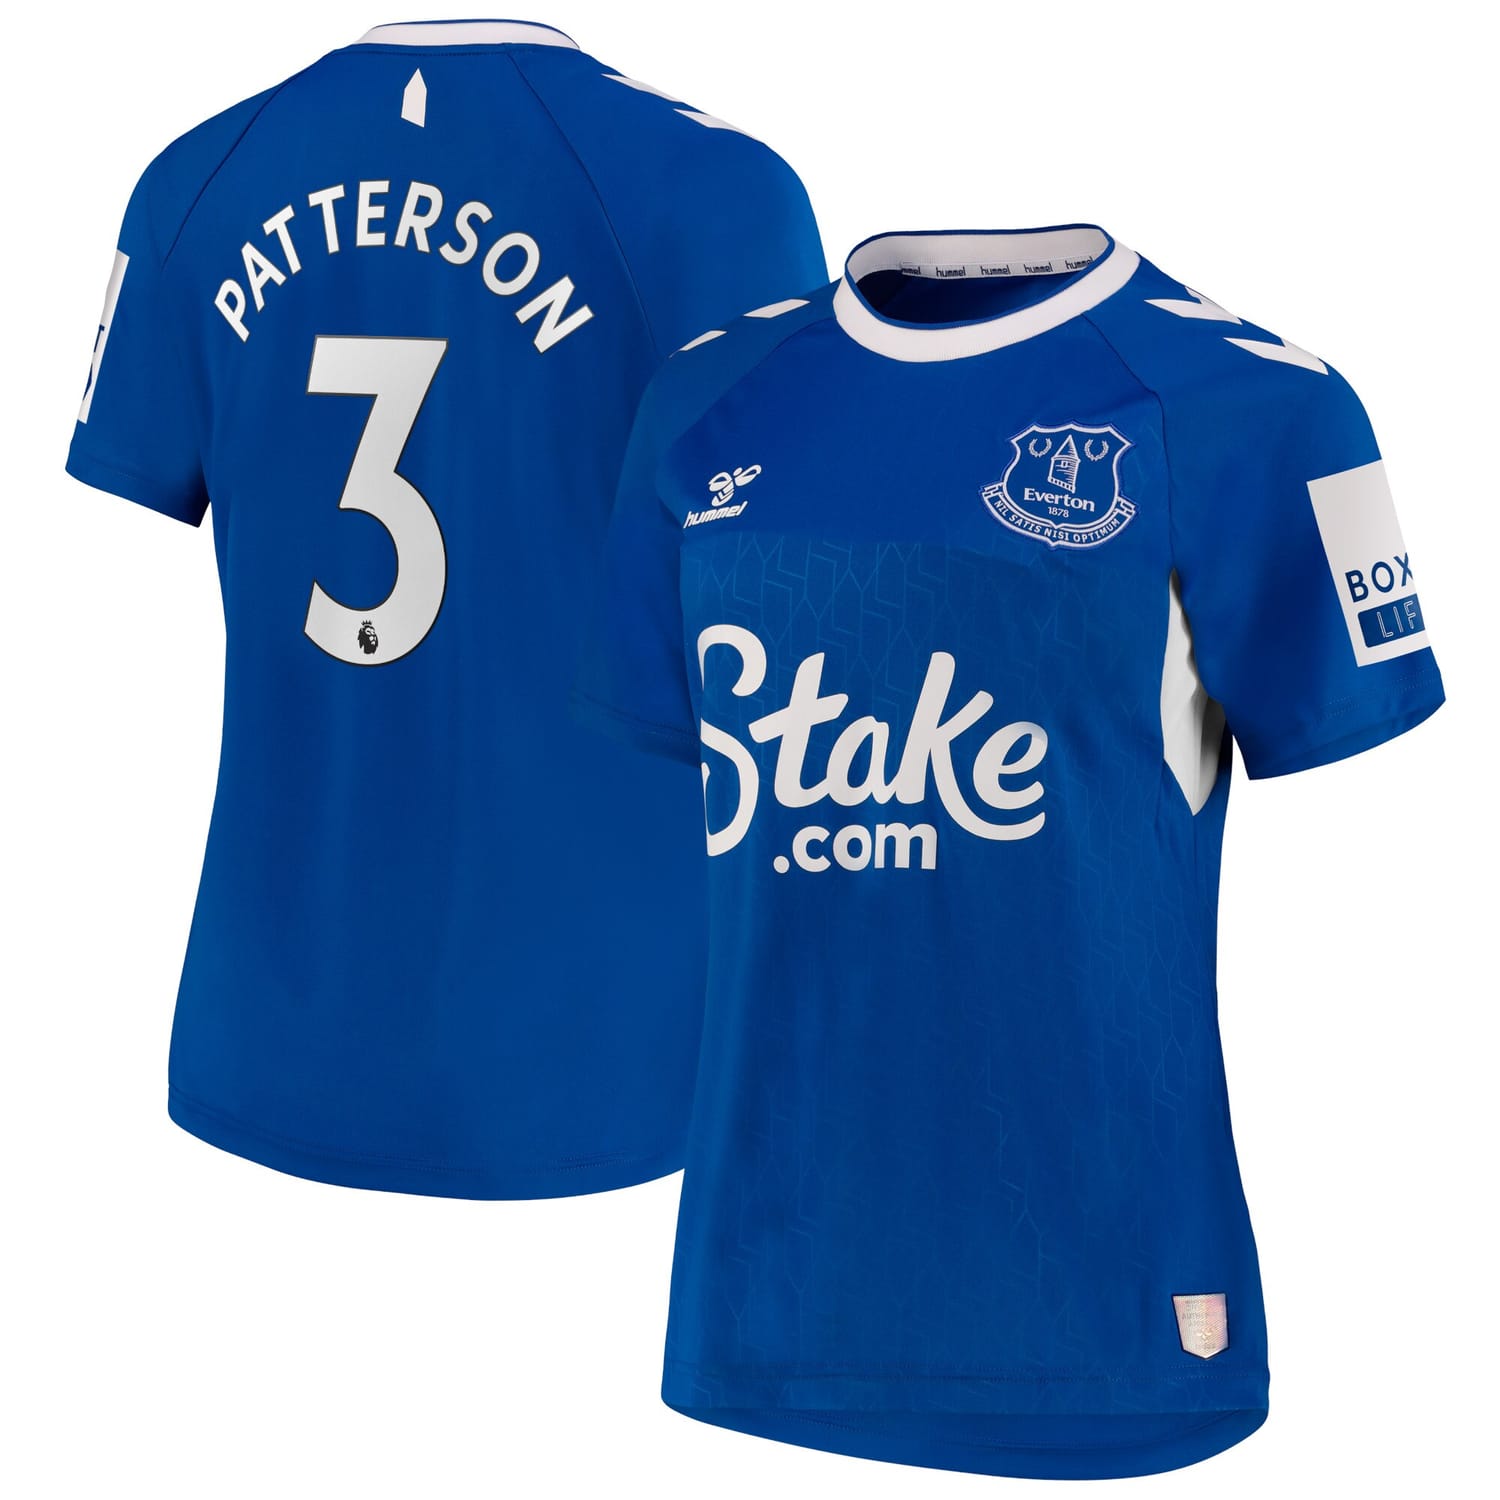 Premier League Everton Home Jersey Shirt 2022-23 player Nathan Patterson 3 printing for Women